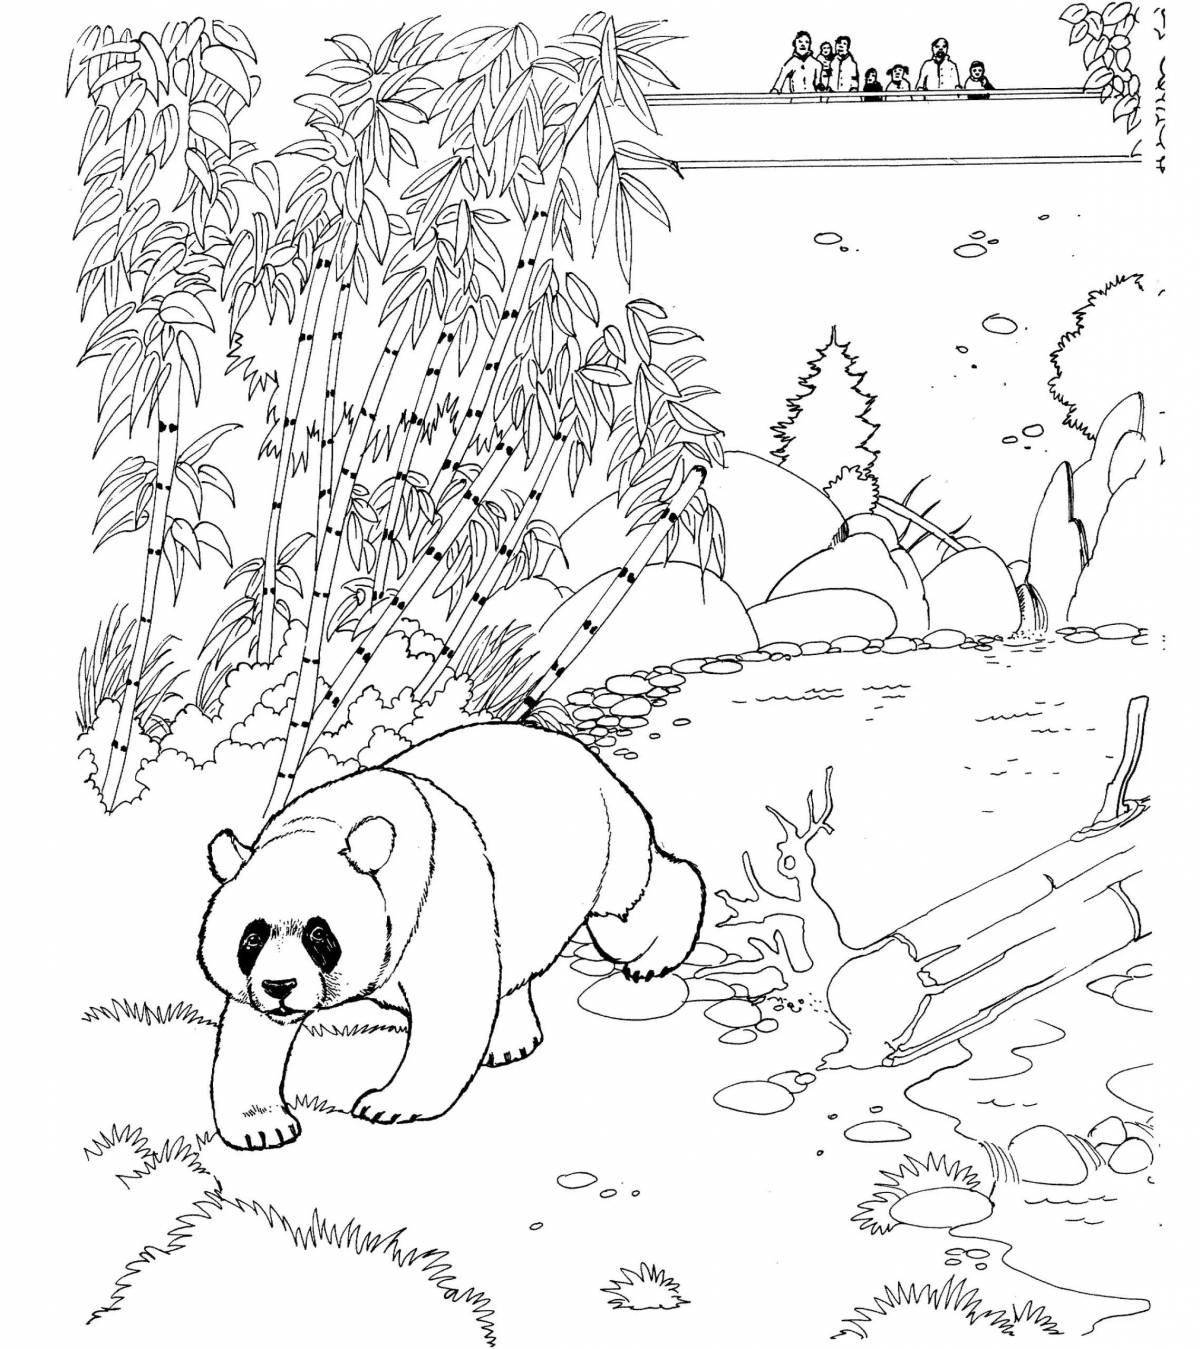 Live panda coloring pages for kids